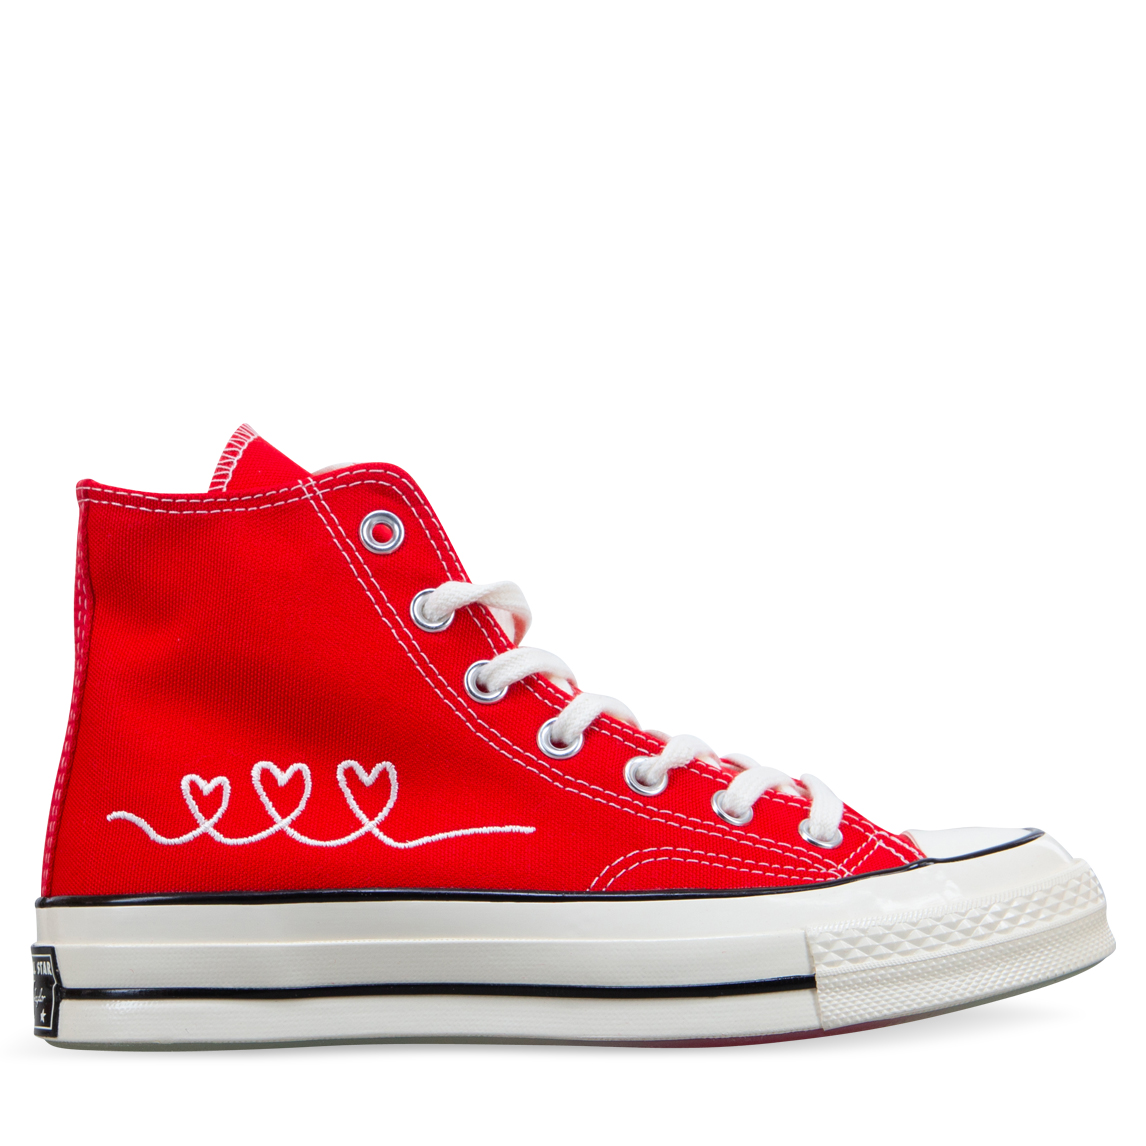 Converse CHUCK TAYLOR ALL STAR 70 HIGH University Red/Egret/Black | Hype DC